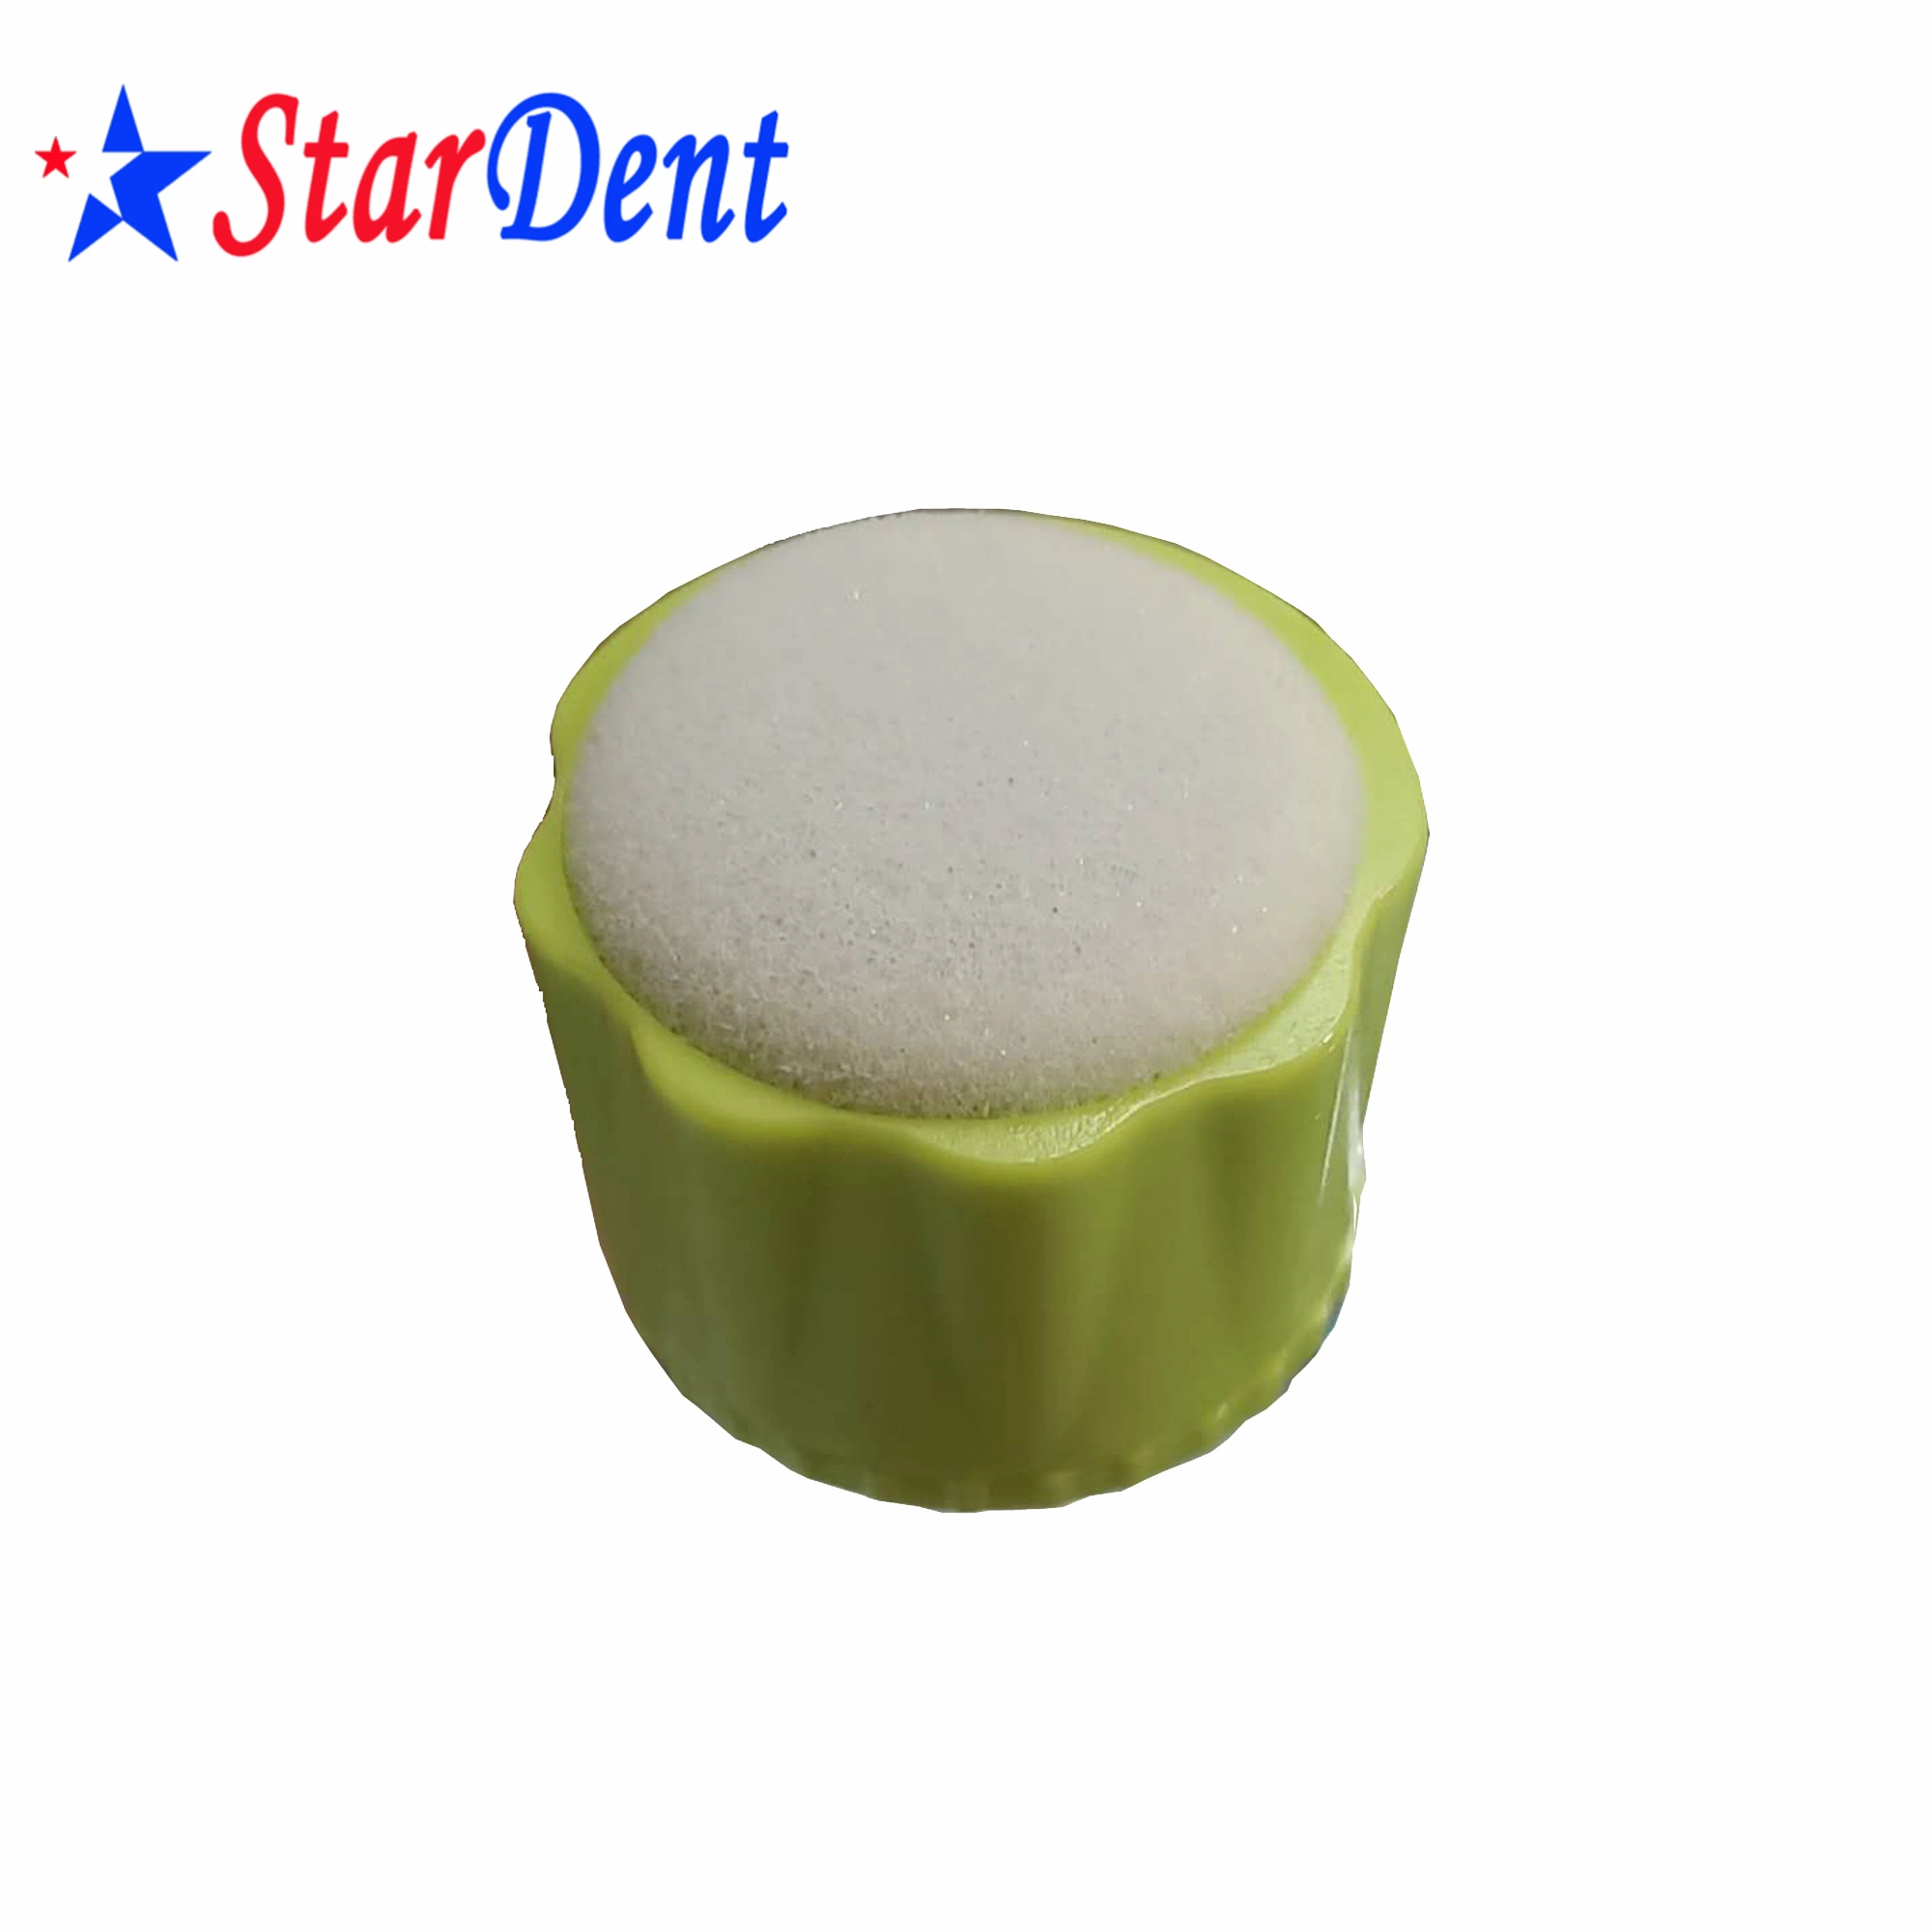 Clincal Round Orthodontic Material Instrument Endo Clean Autoclavable Holder Disinfection Cotton Box